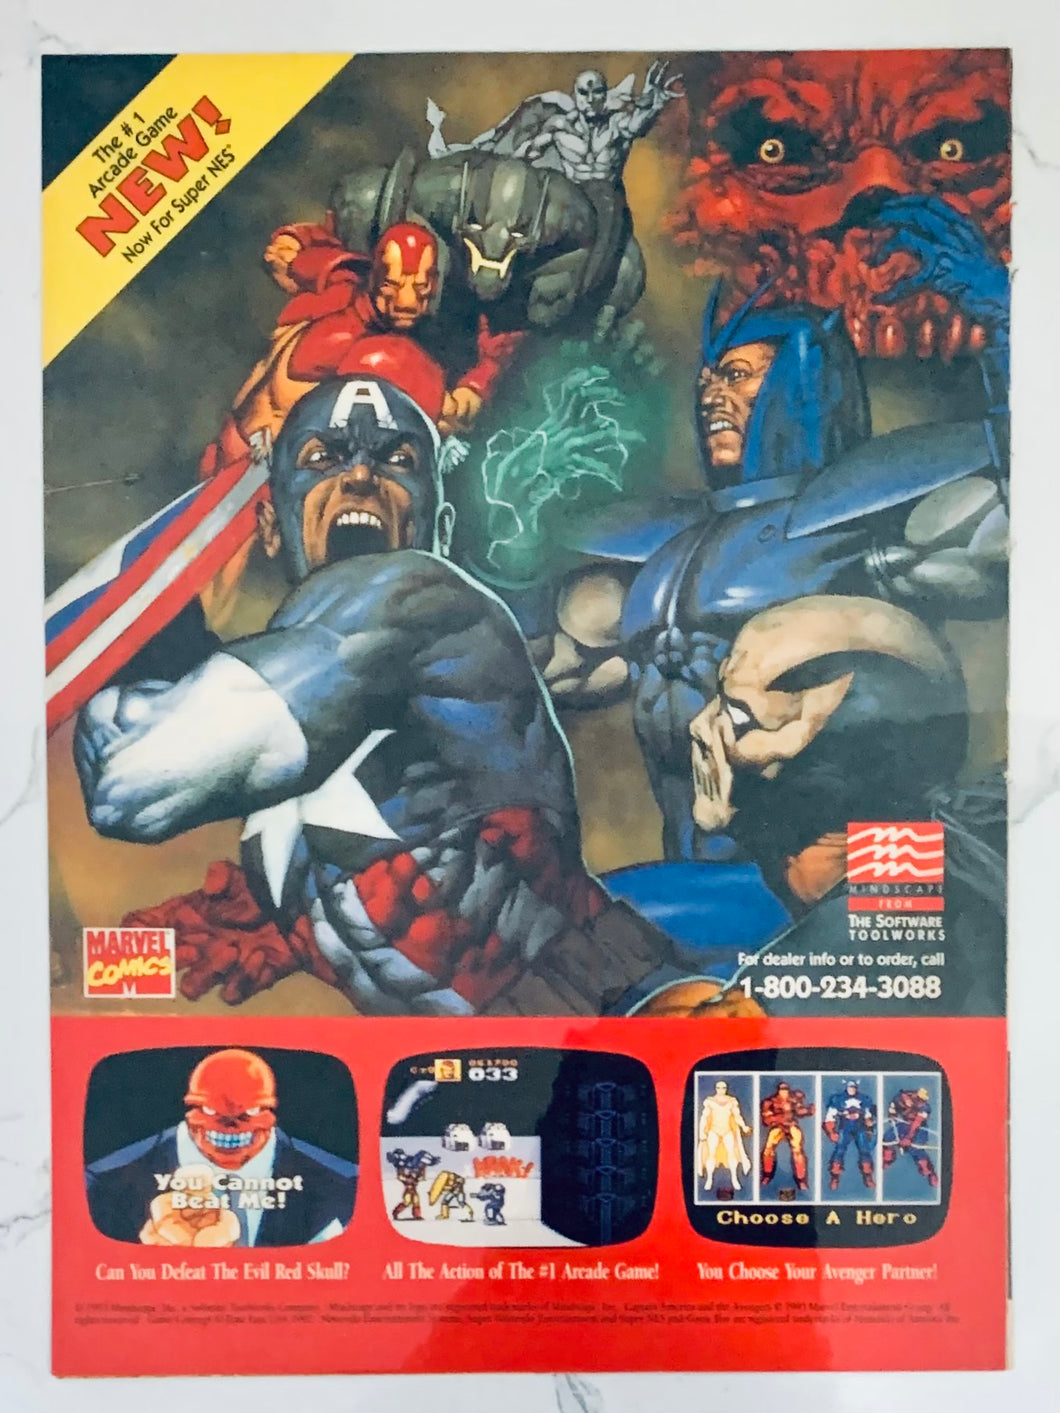 Captain America and the Avengers - SNES - Original Vintage Advertisement - Print Ads - Laminated A4 Poster